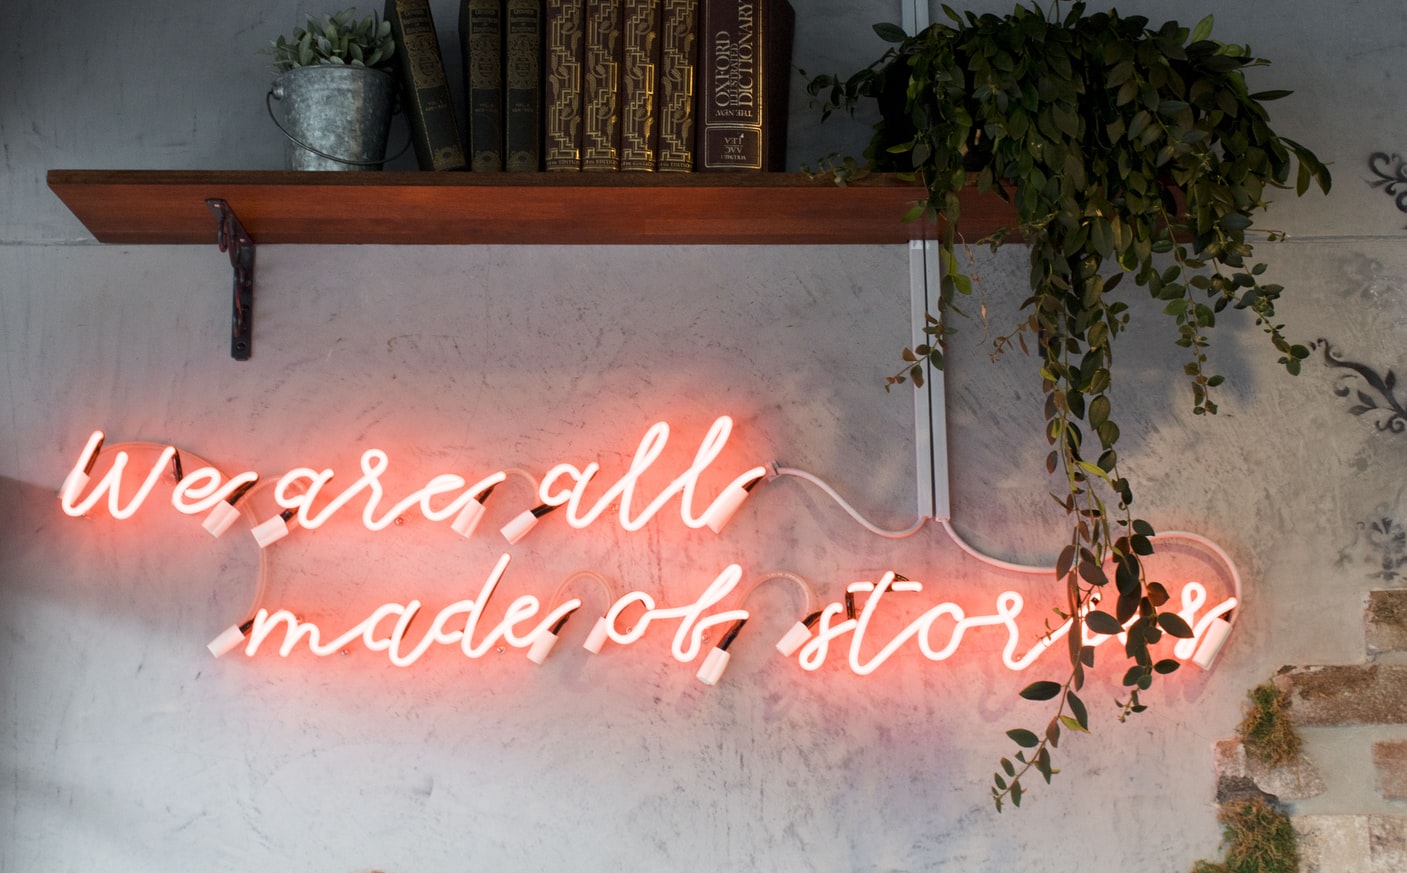 "We are all made of stories" on pink neon sign